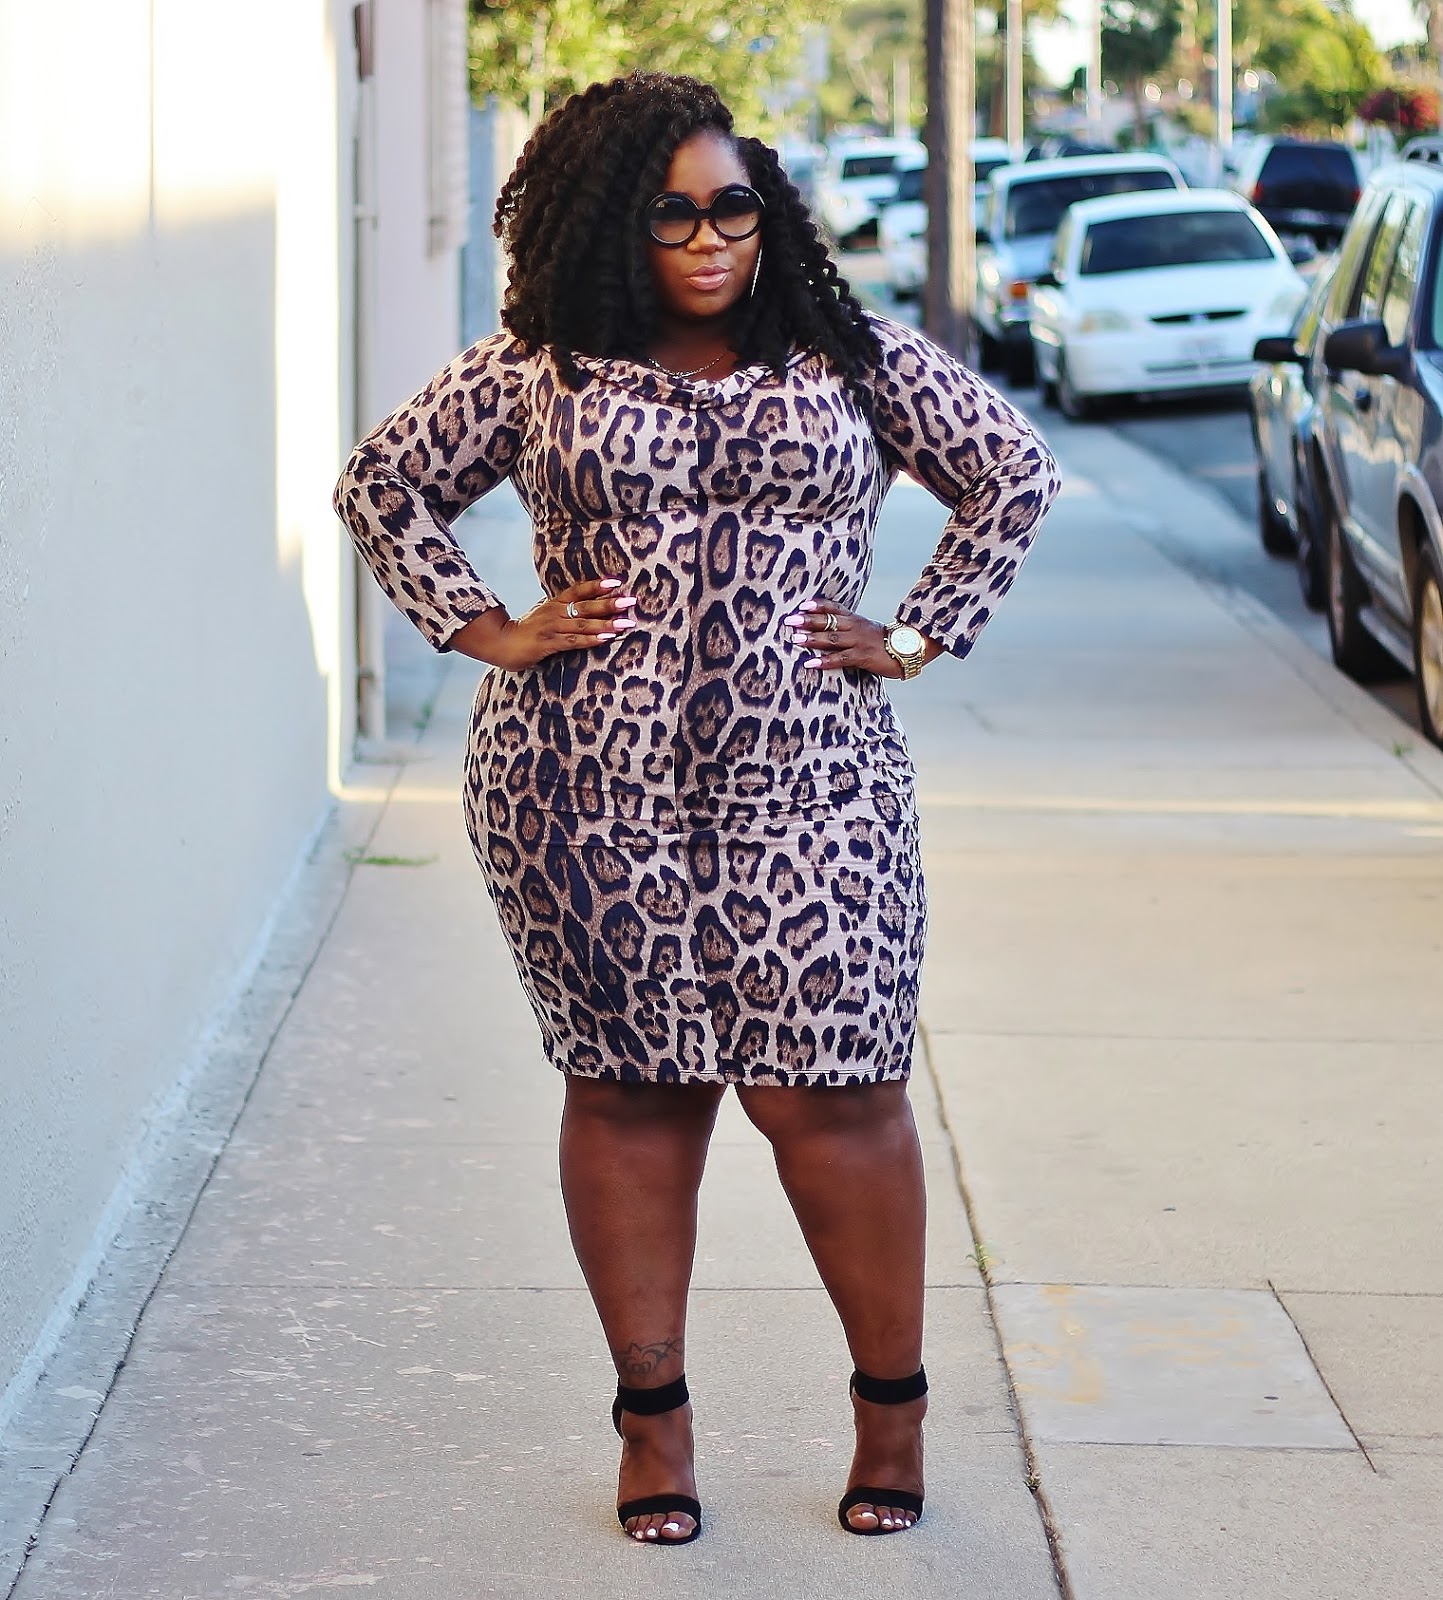 LACE N LEOPARD: Animal Attraction